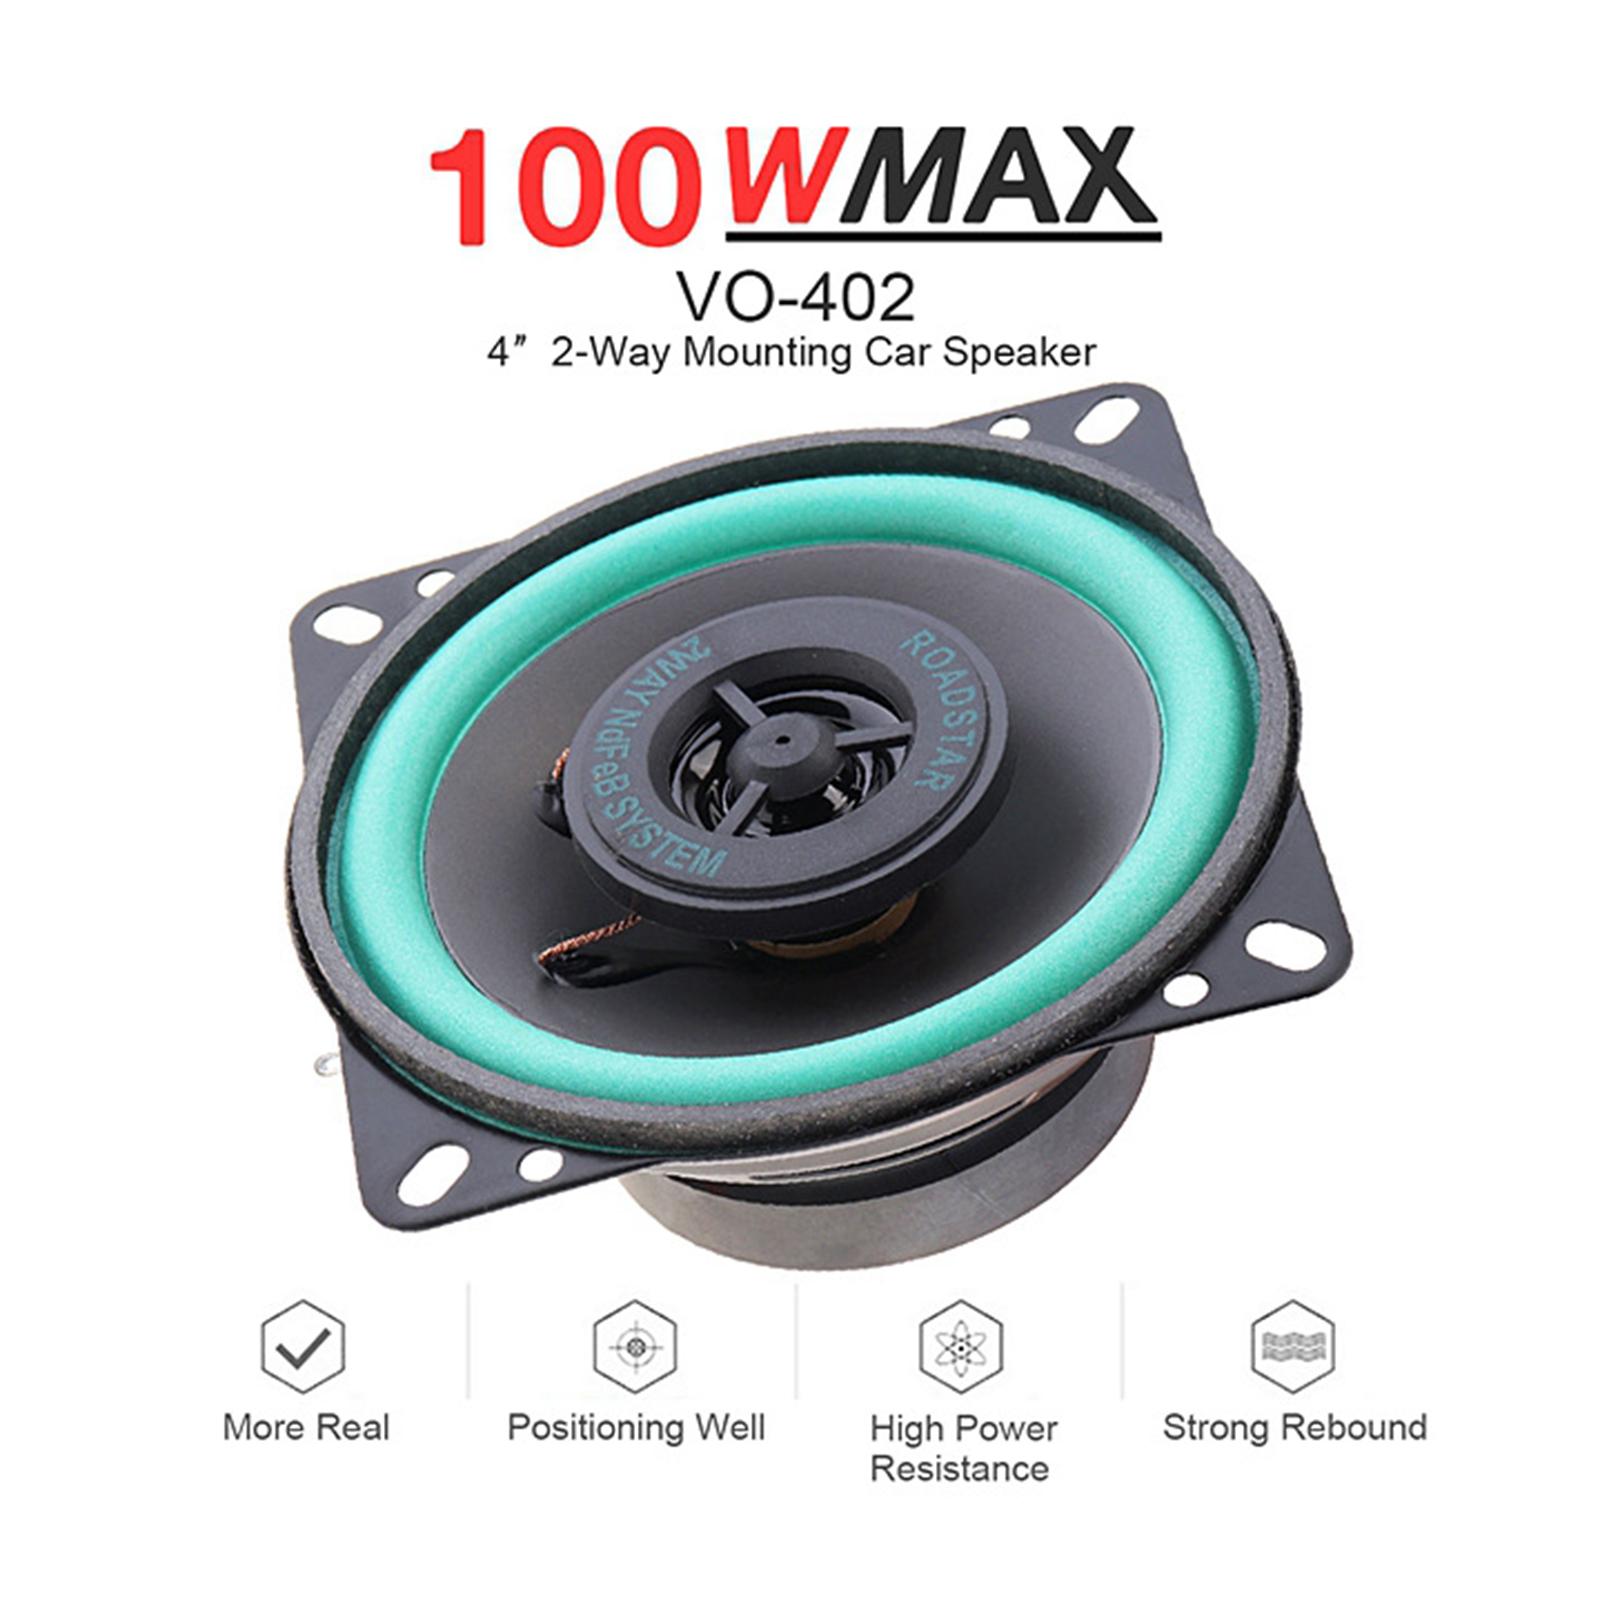 Car Speakers Stereo Full Range with Polypropylene Cone 1pc Replace Enhances car stereo by producing powerful audio sound - VO-402 4 inch 100W - image 3 of 8